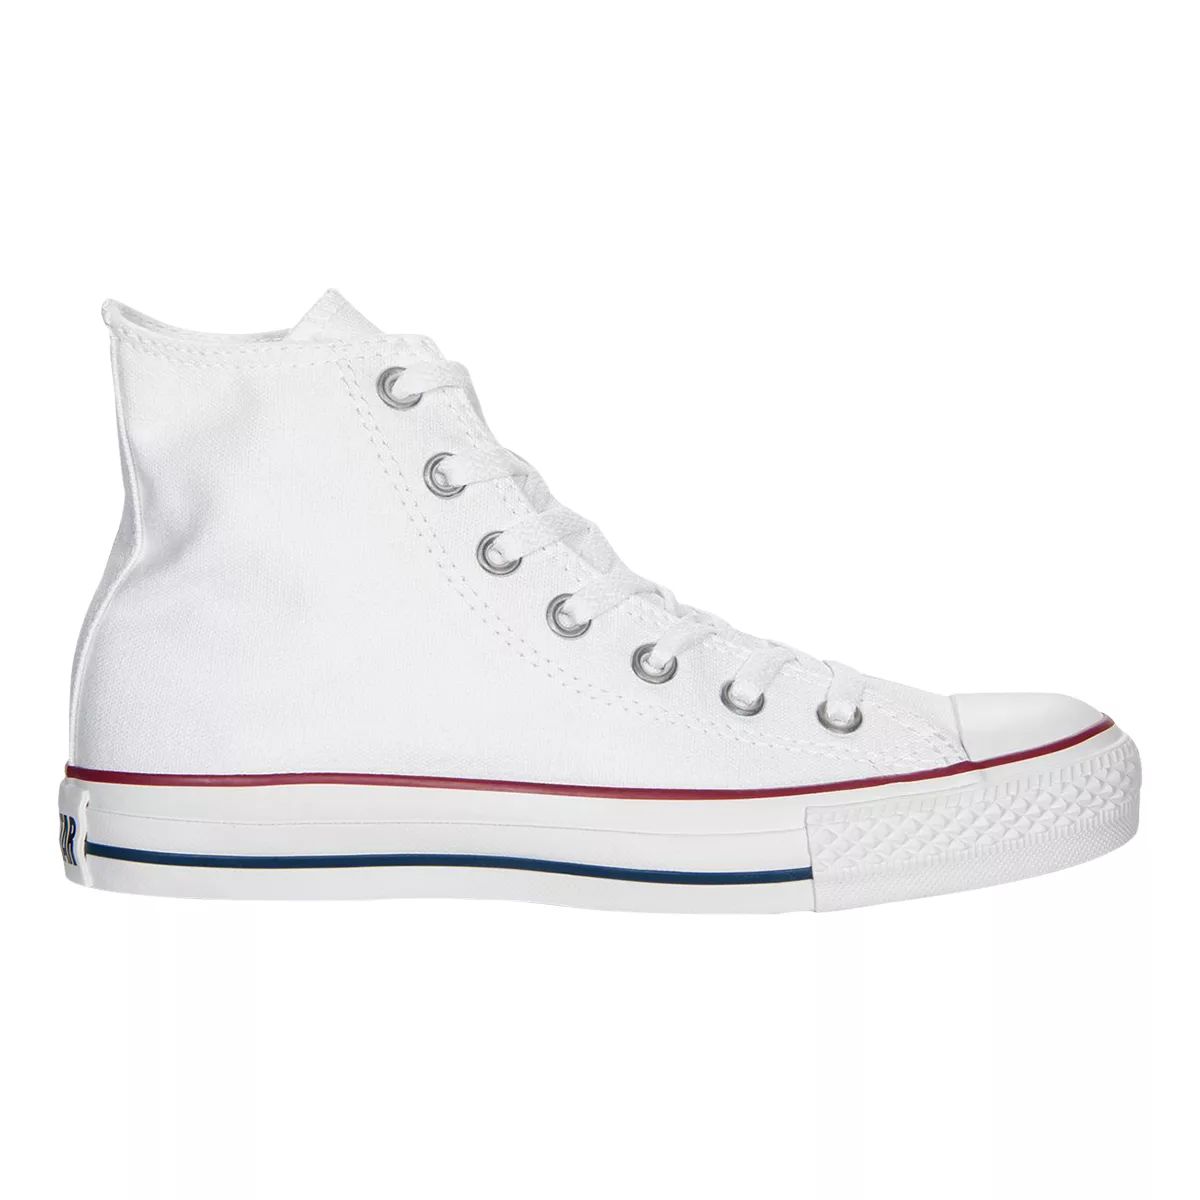 Image of Converse Women's Chuck Taylor All Star Shoes Sneakers High Top Canvas